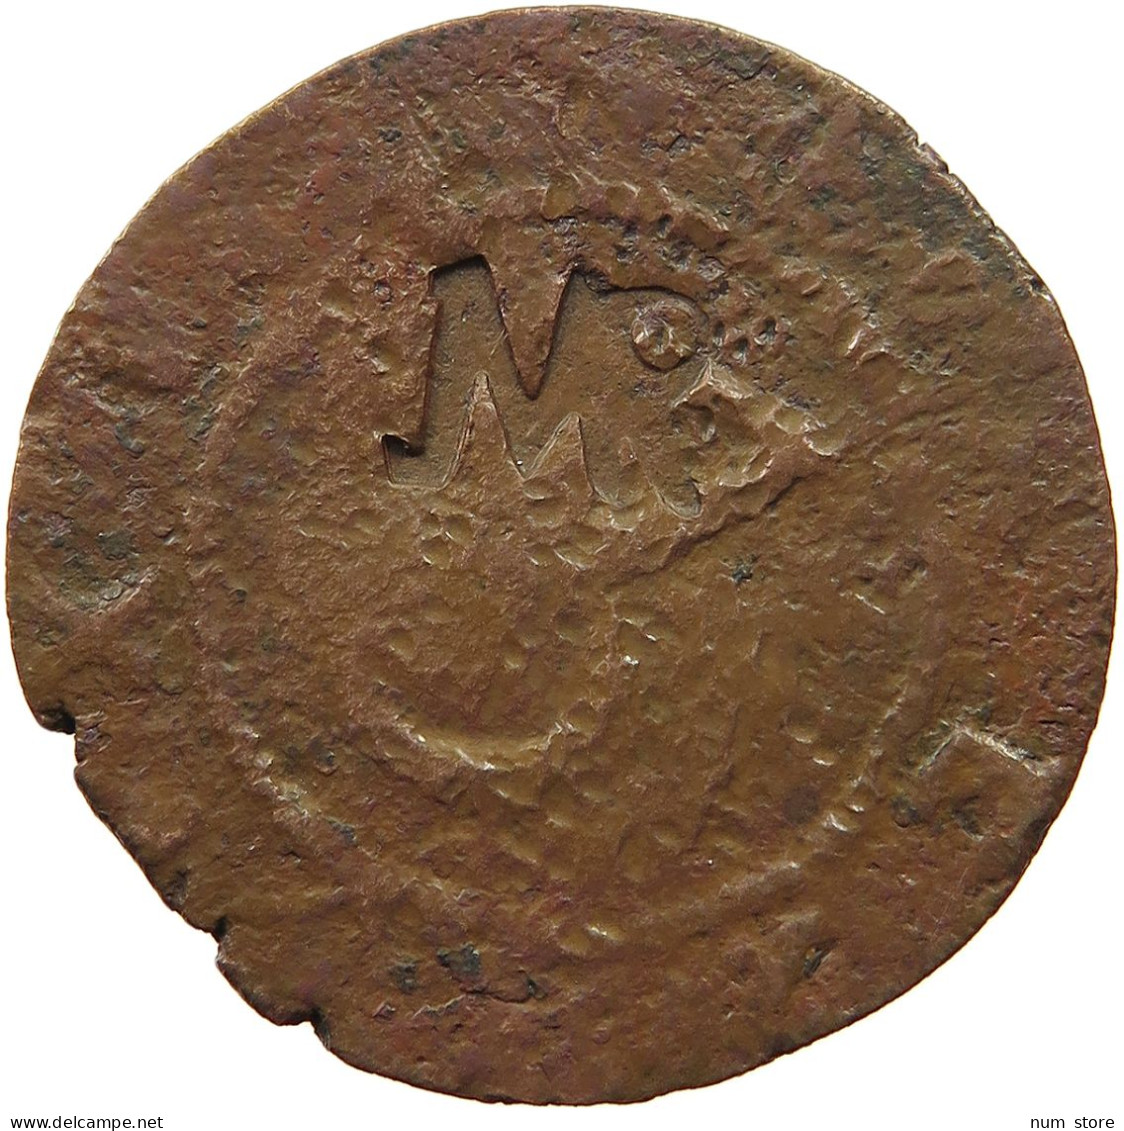 MOZAMBIQUE REIS  MOZAMBIQUE COPPER REIS COUNTERMARKED MR VERY RARE #t059 0383 - Mosambik